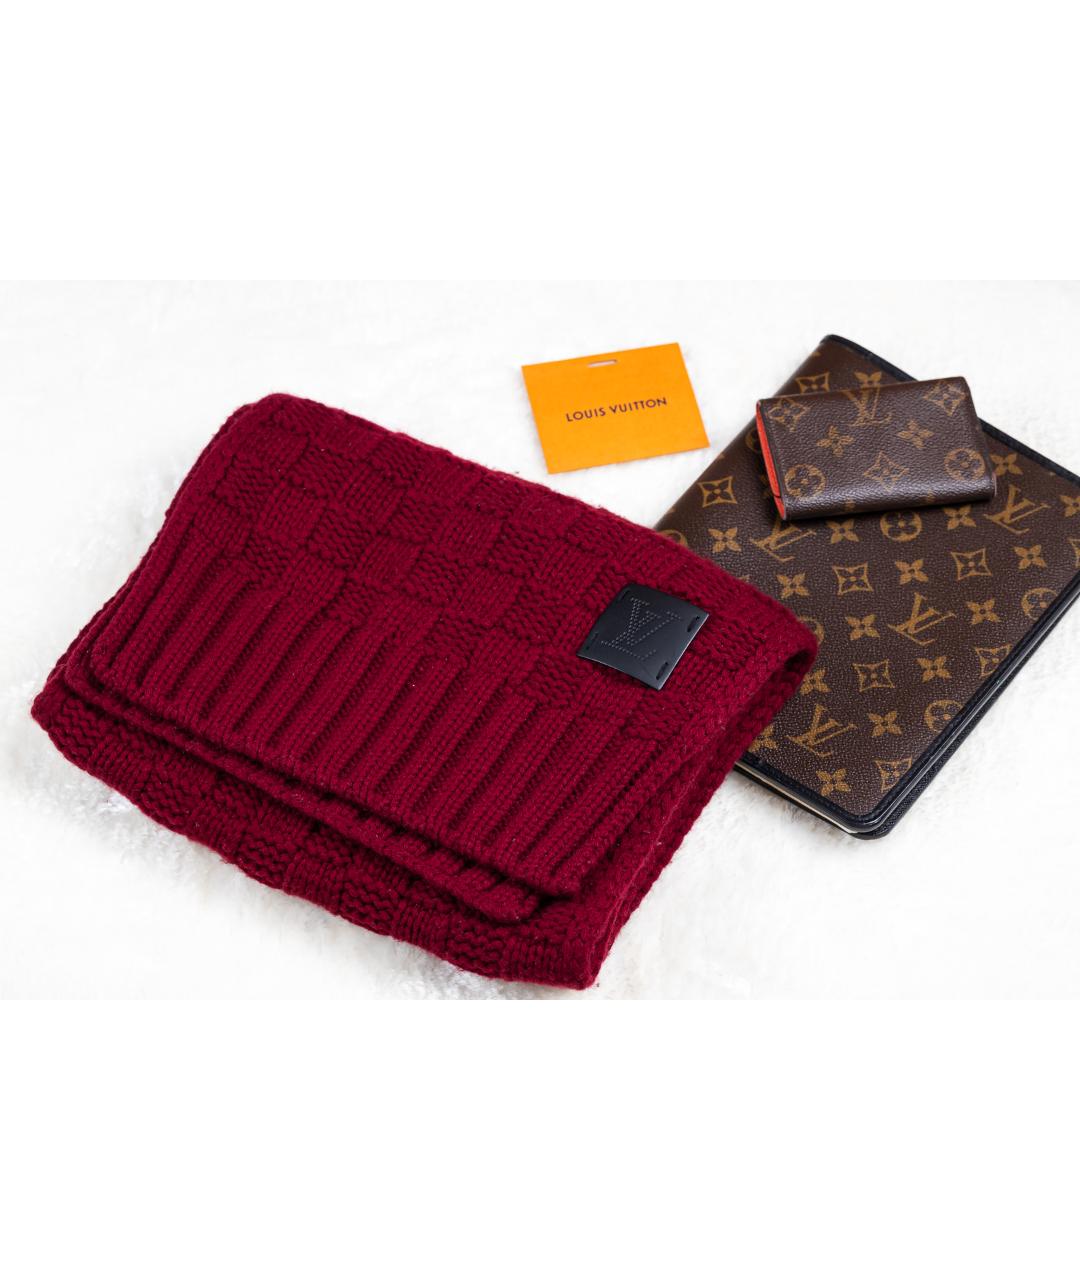 LOUIS VUITTON PRE-OWNED Бордовый кашемировый шарф, фото 5